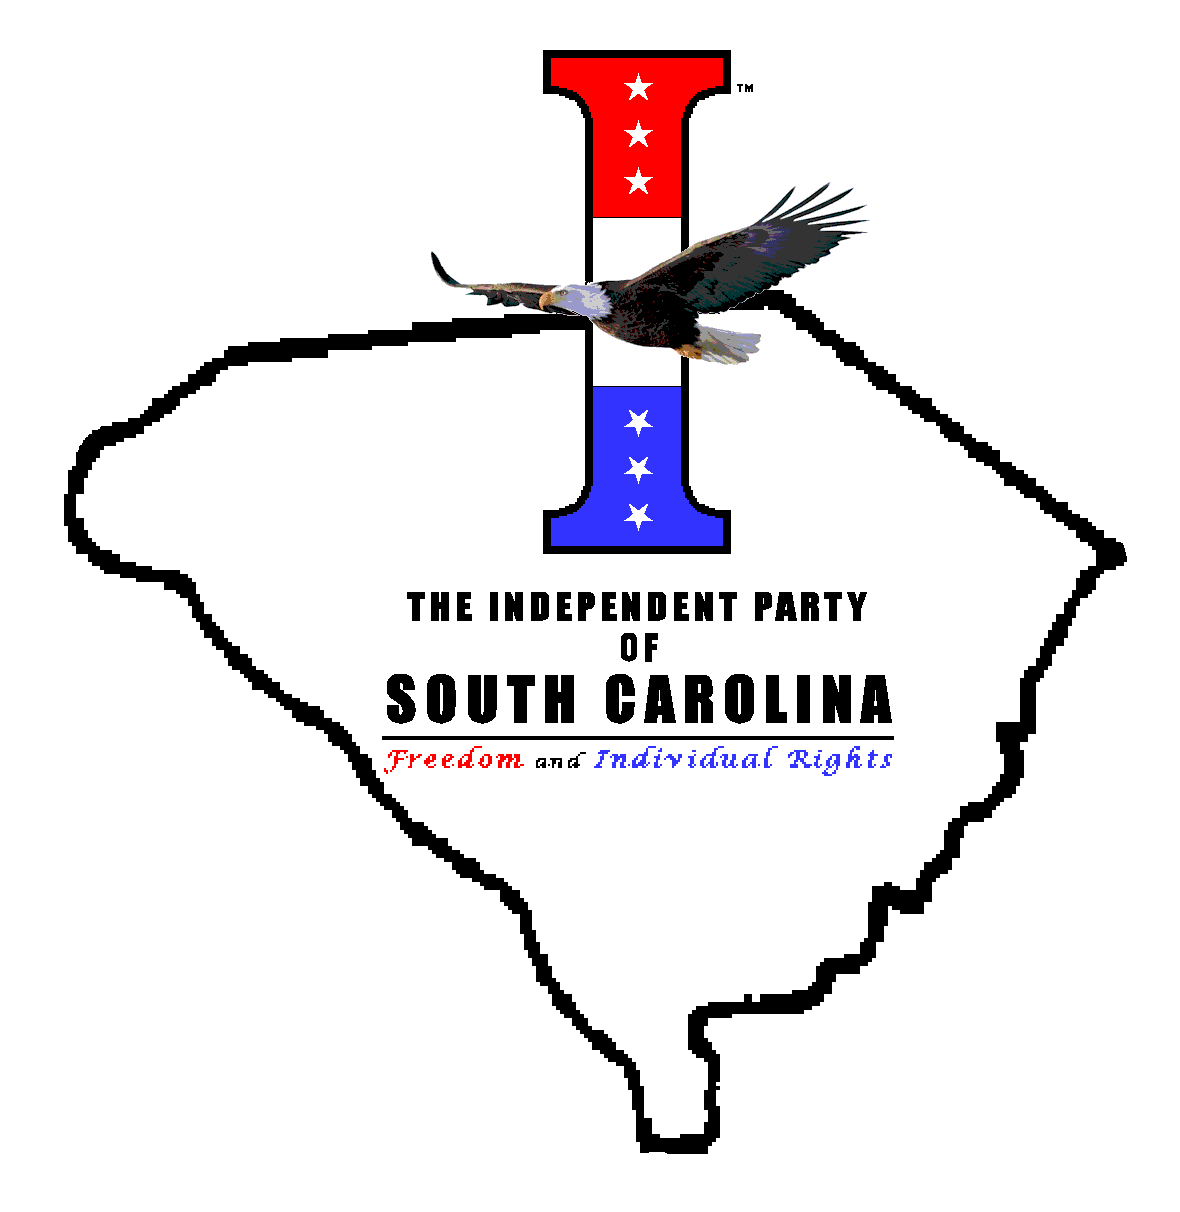 The Independent Party of South Carolina!